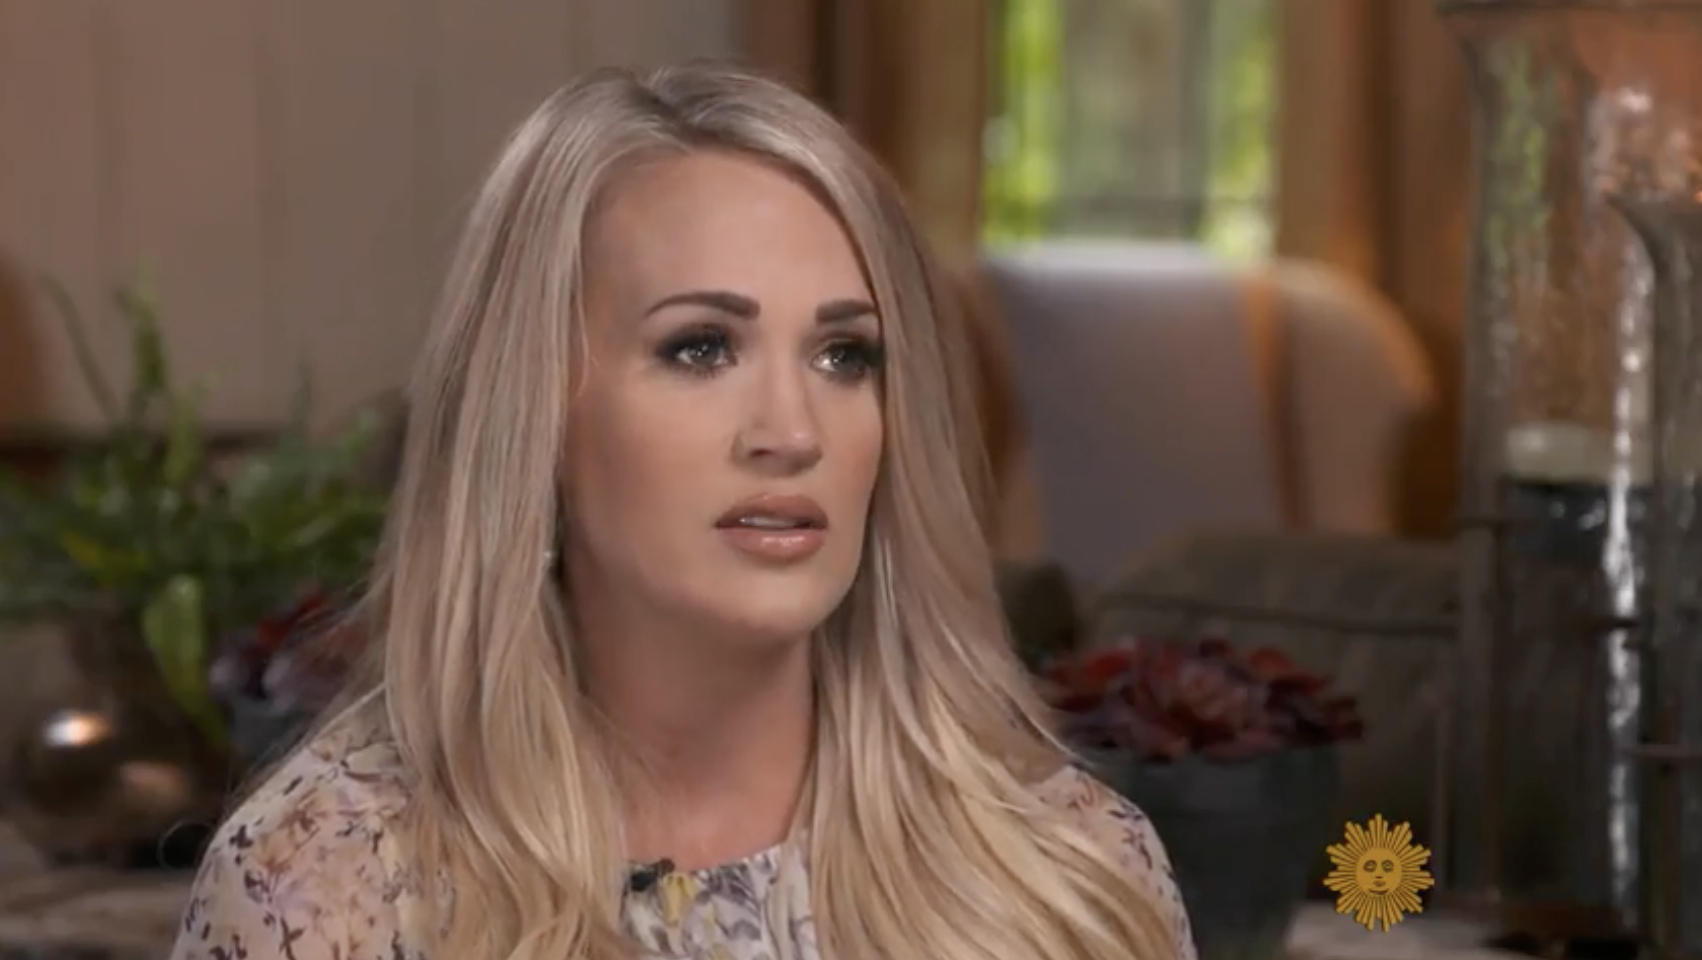 Carrie Underwood reveals she has three miscarriages in two years